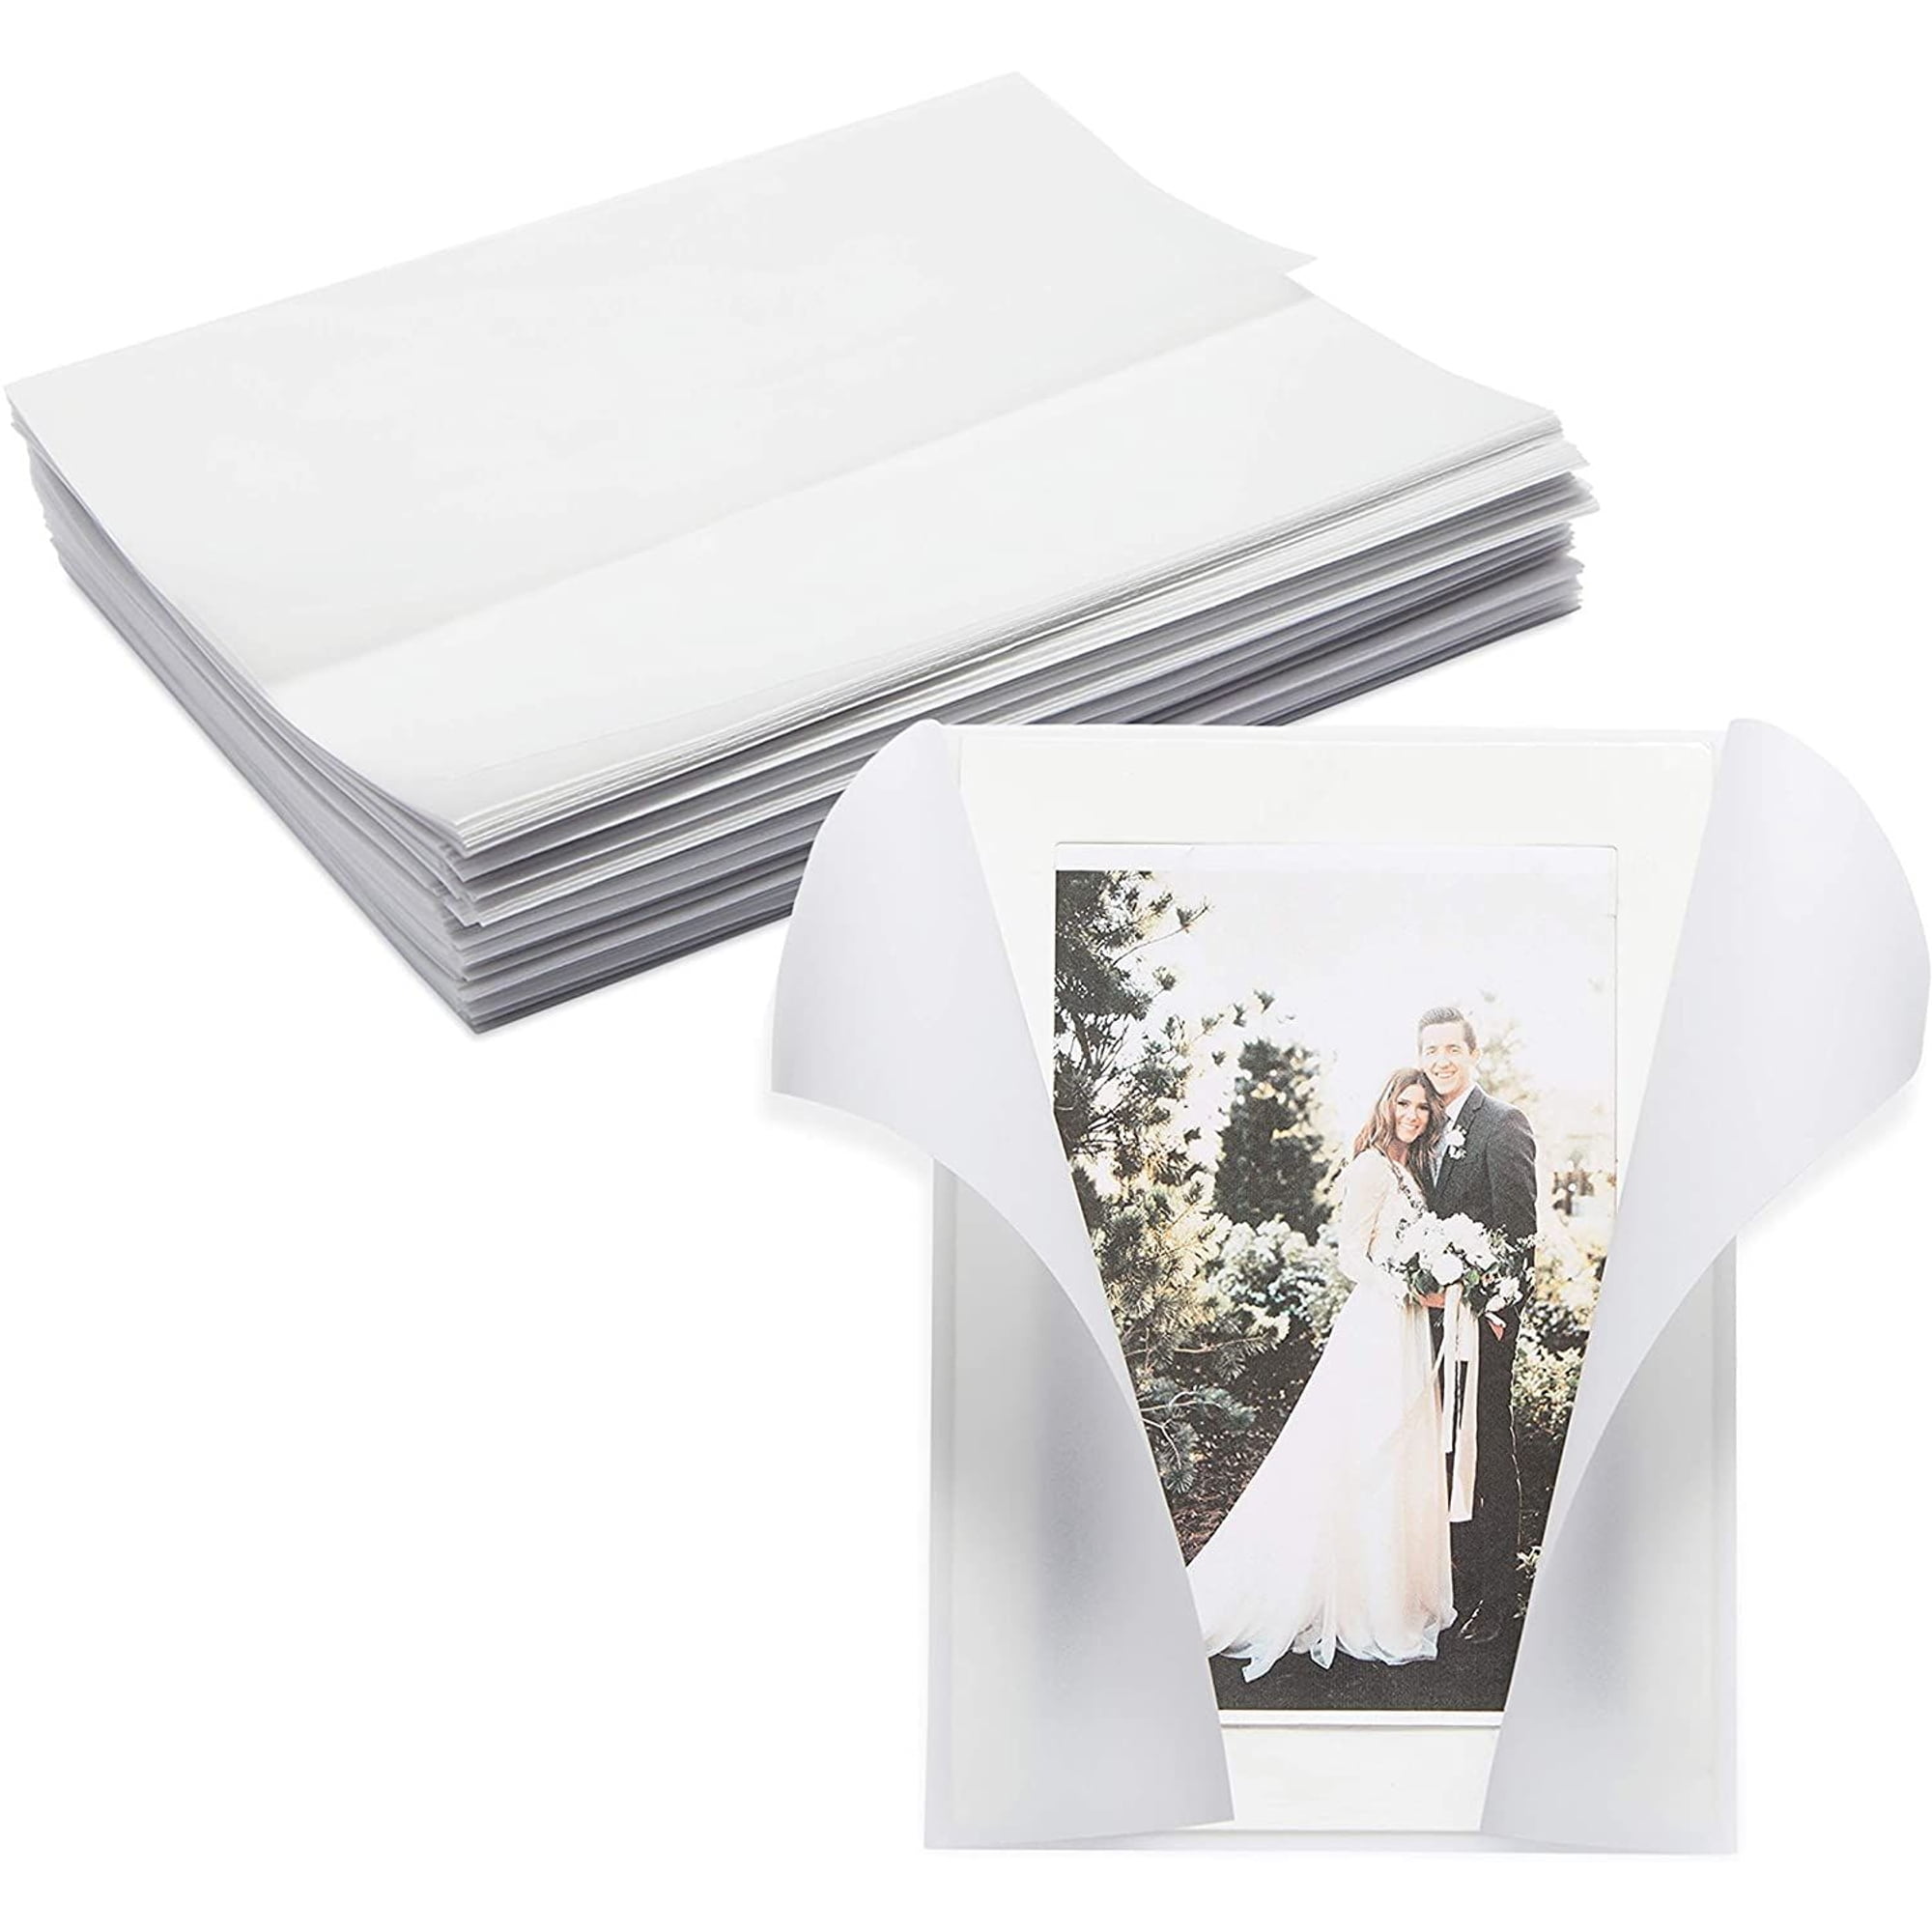 Ctosree 100 Sets Pre Folded Vellum Jackets Set Include 100 Vellum Jackets  for 5 x 7 Inch Invitations and 350 Gold Eucalyptus Branch Stickers  Translucent Wedding Invitations Wraps for Wedding